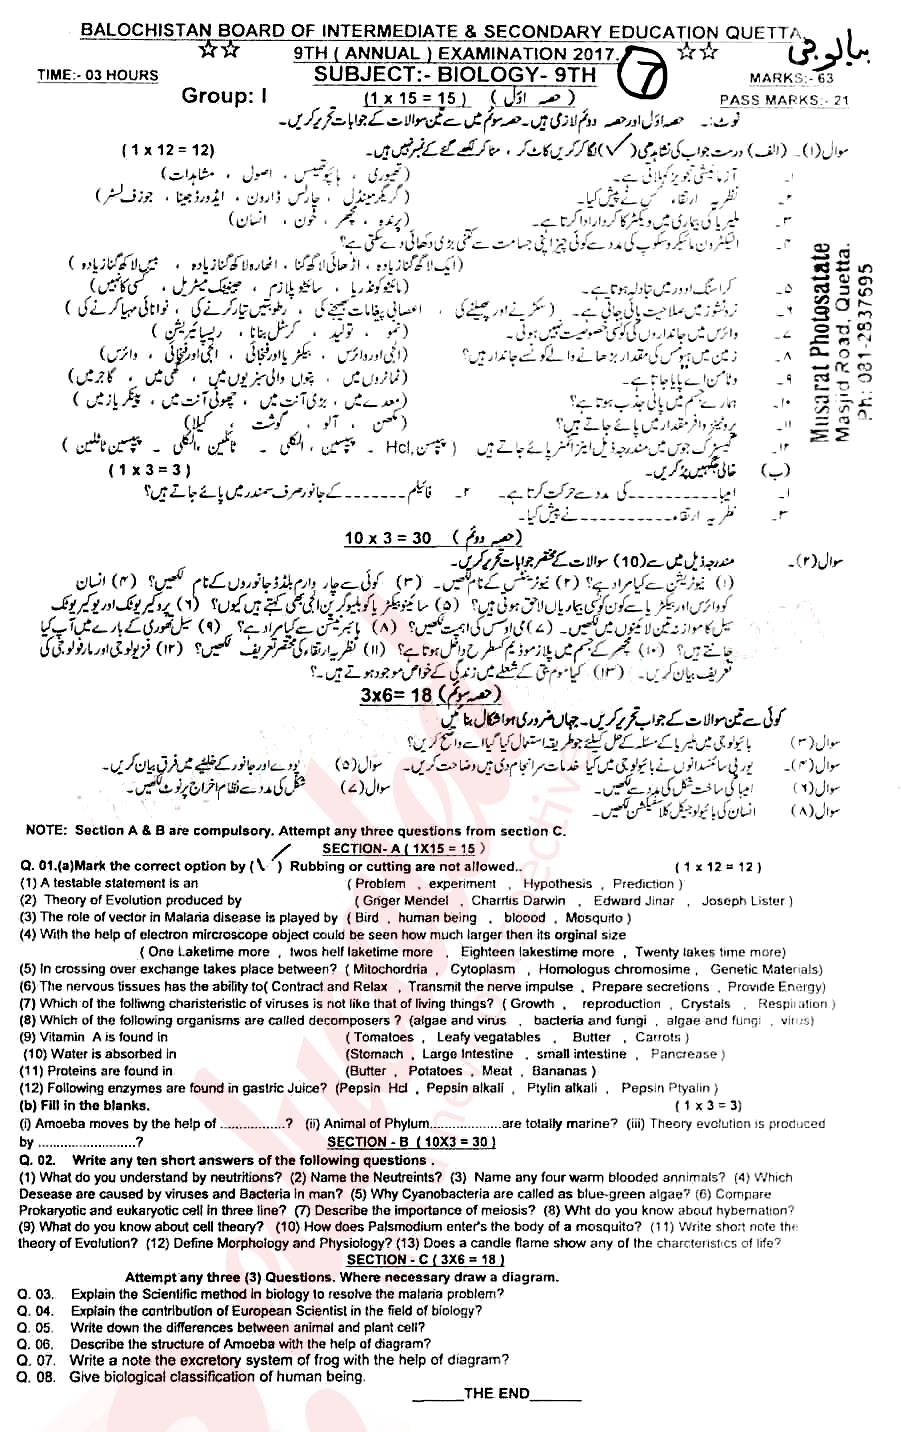 Biology 9th class Past Paper Group 1 BISE Quetta 2017